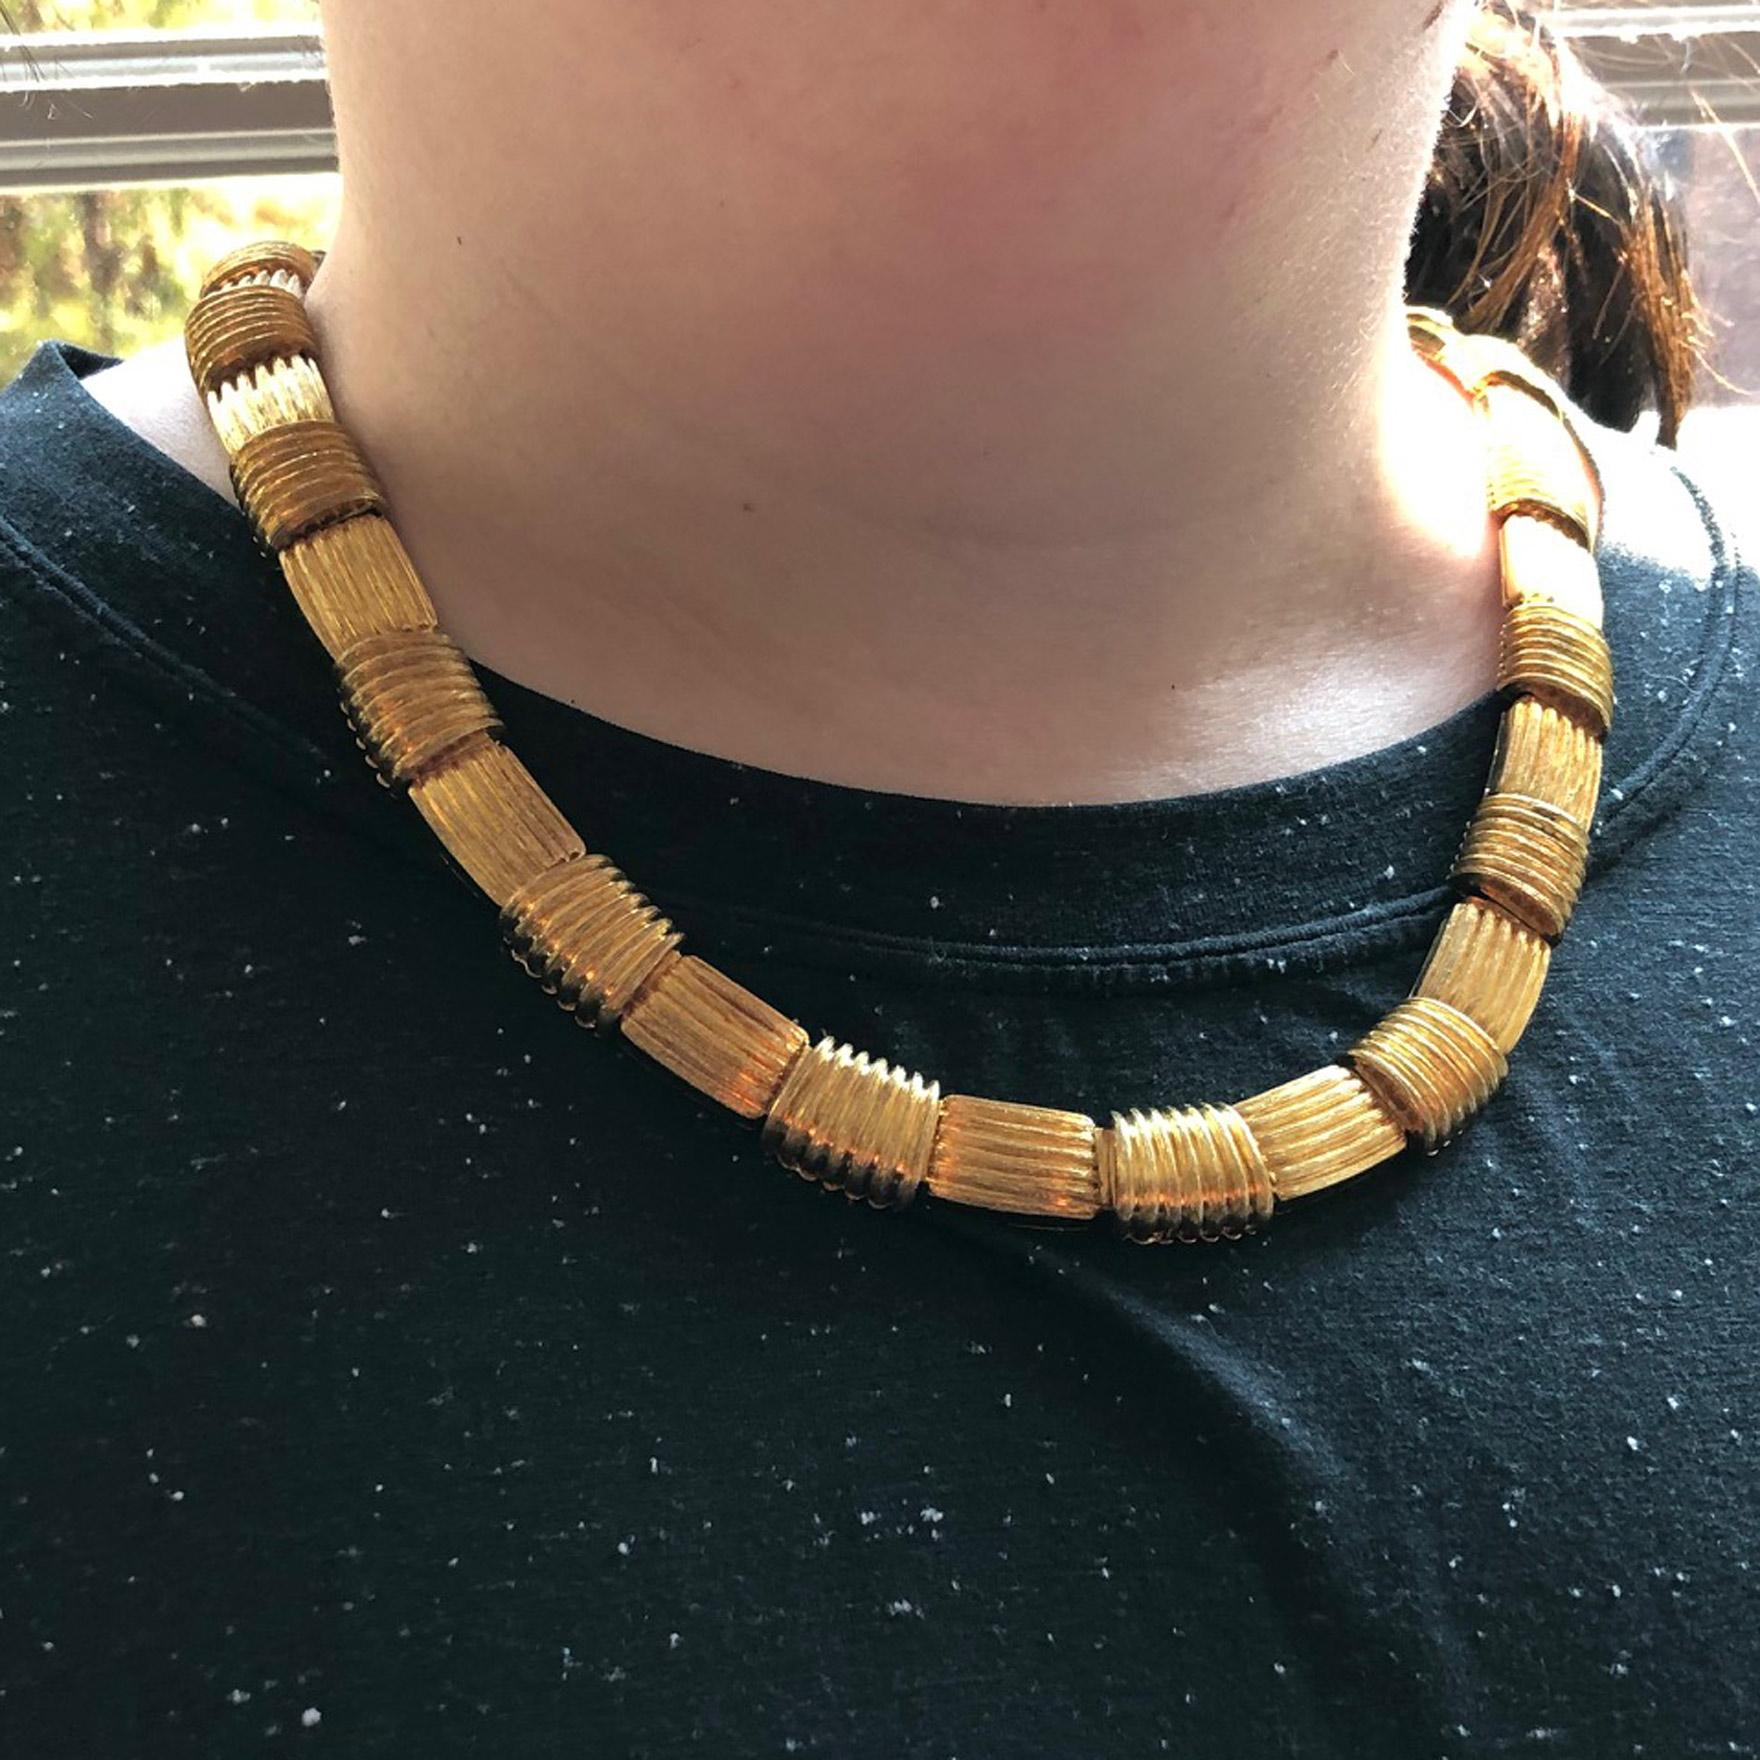 Beautifully designed and masterfully handcrafted chic and wearable 18 karat gold necklace by Henry Dunay. Alternating flexible links with horizontal and vertical textured gold bars create a wonderful three dimensional and stylish look. Signed Henry